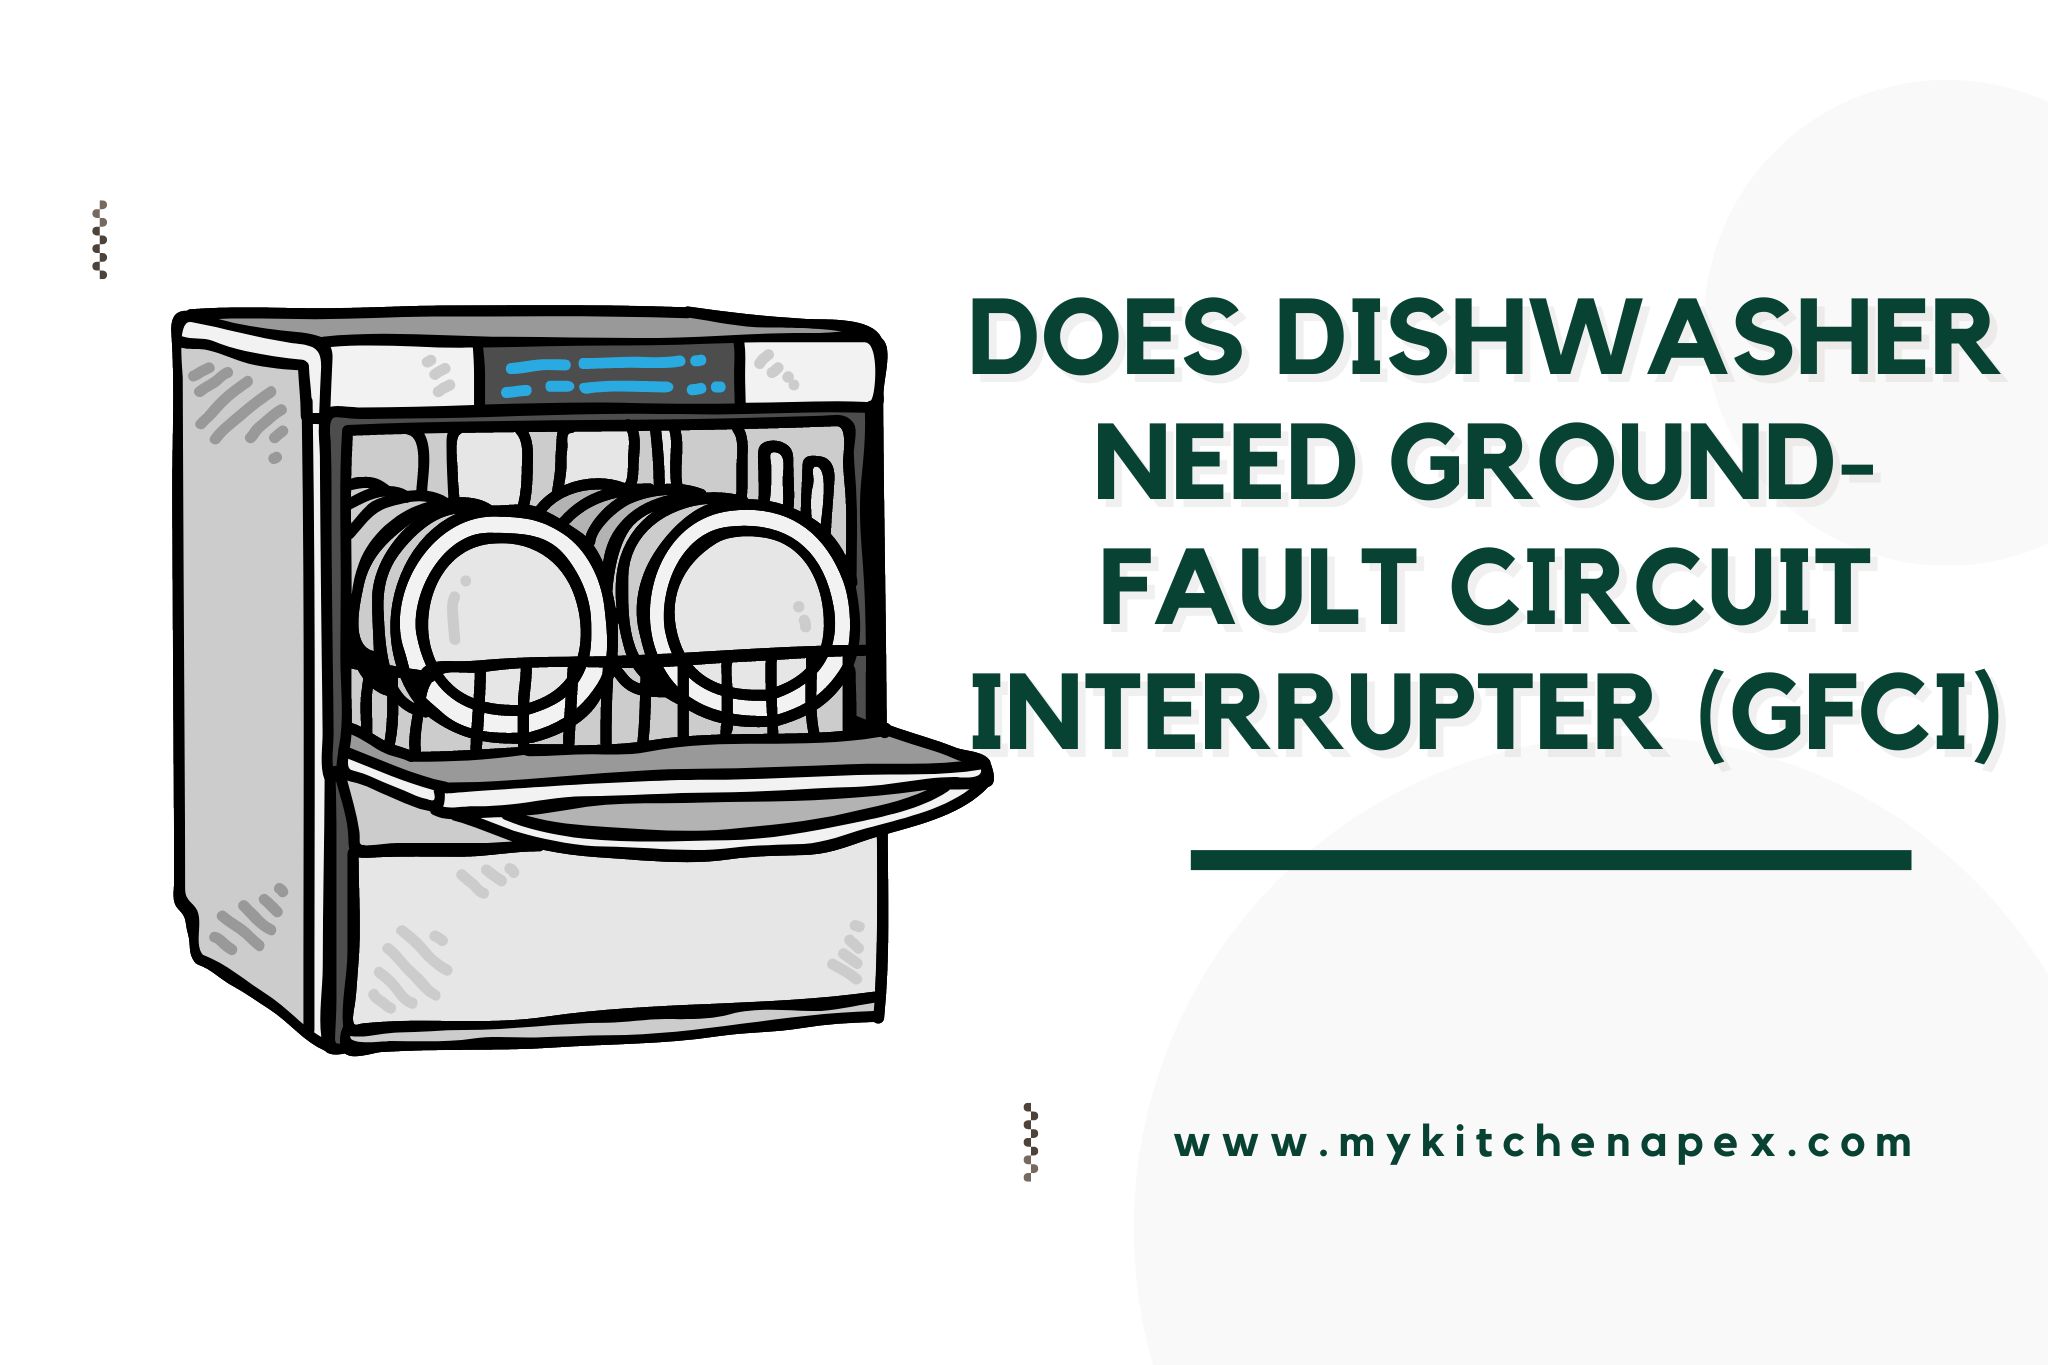 does dishwasher need ground-fault circuit interrupter (gfci)